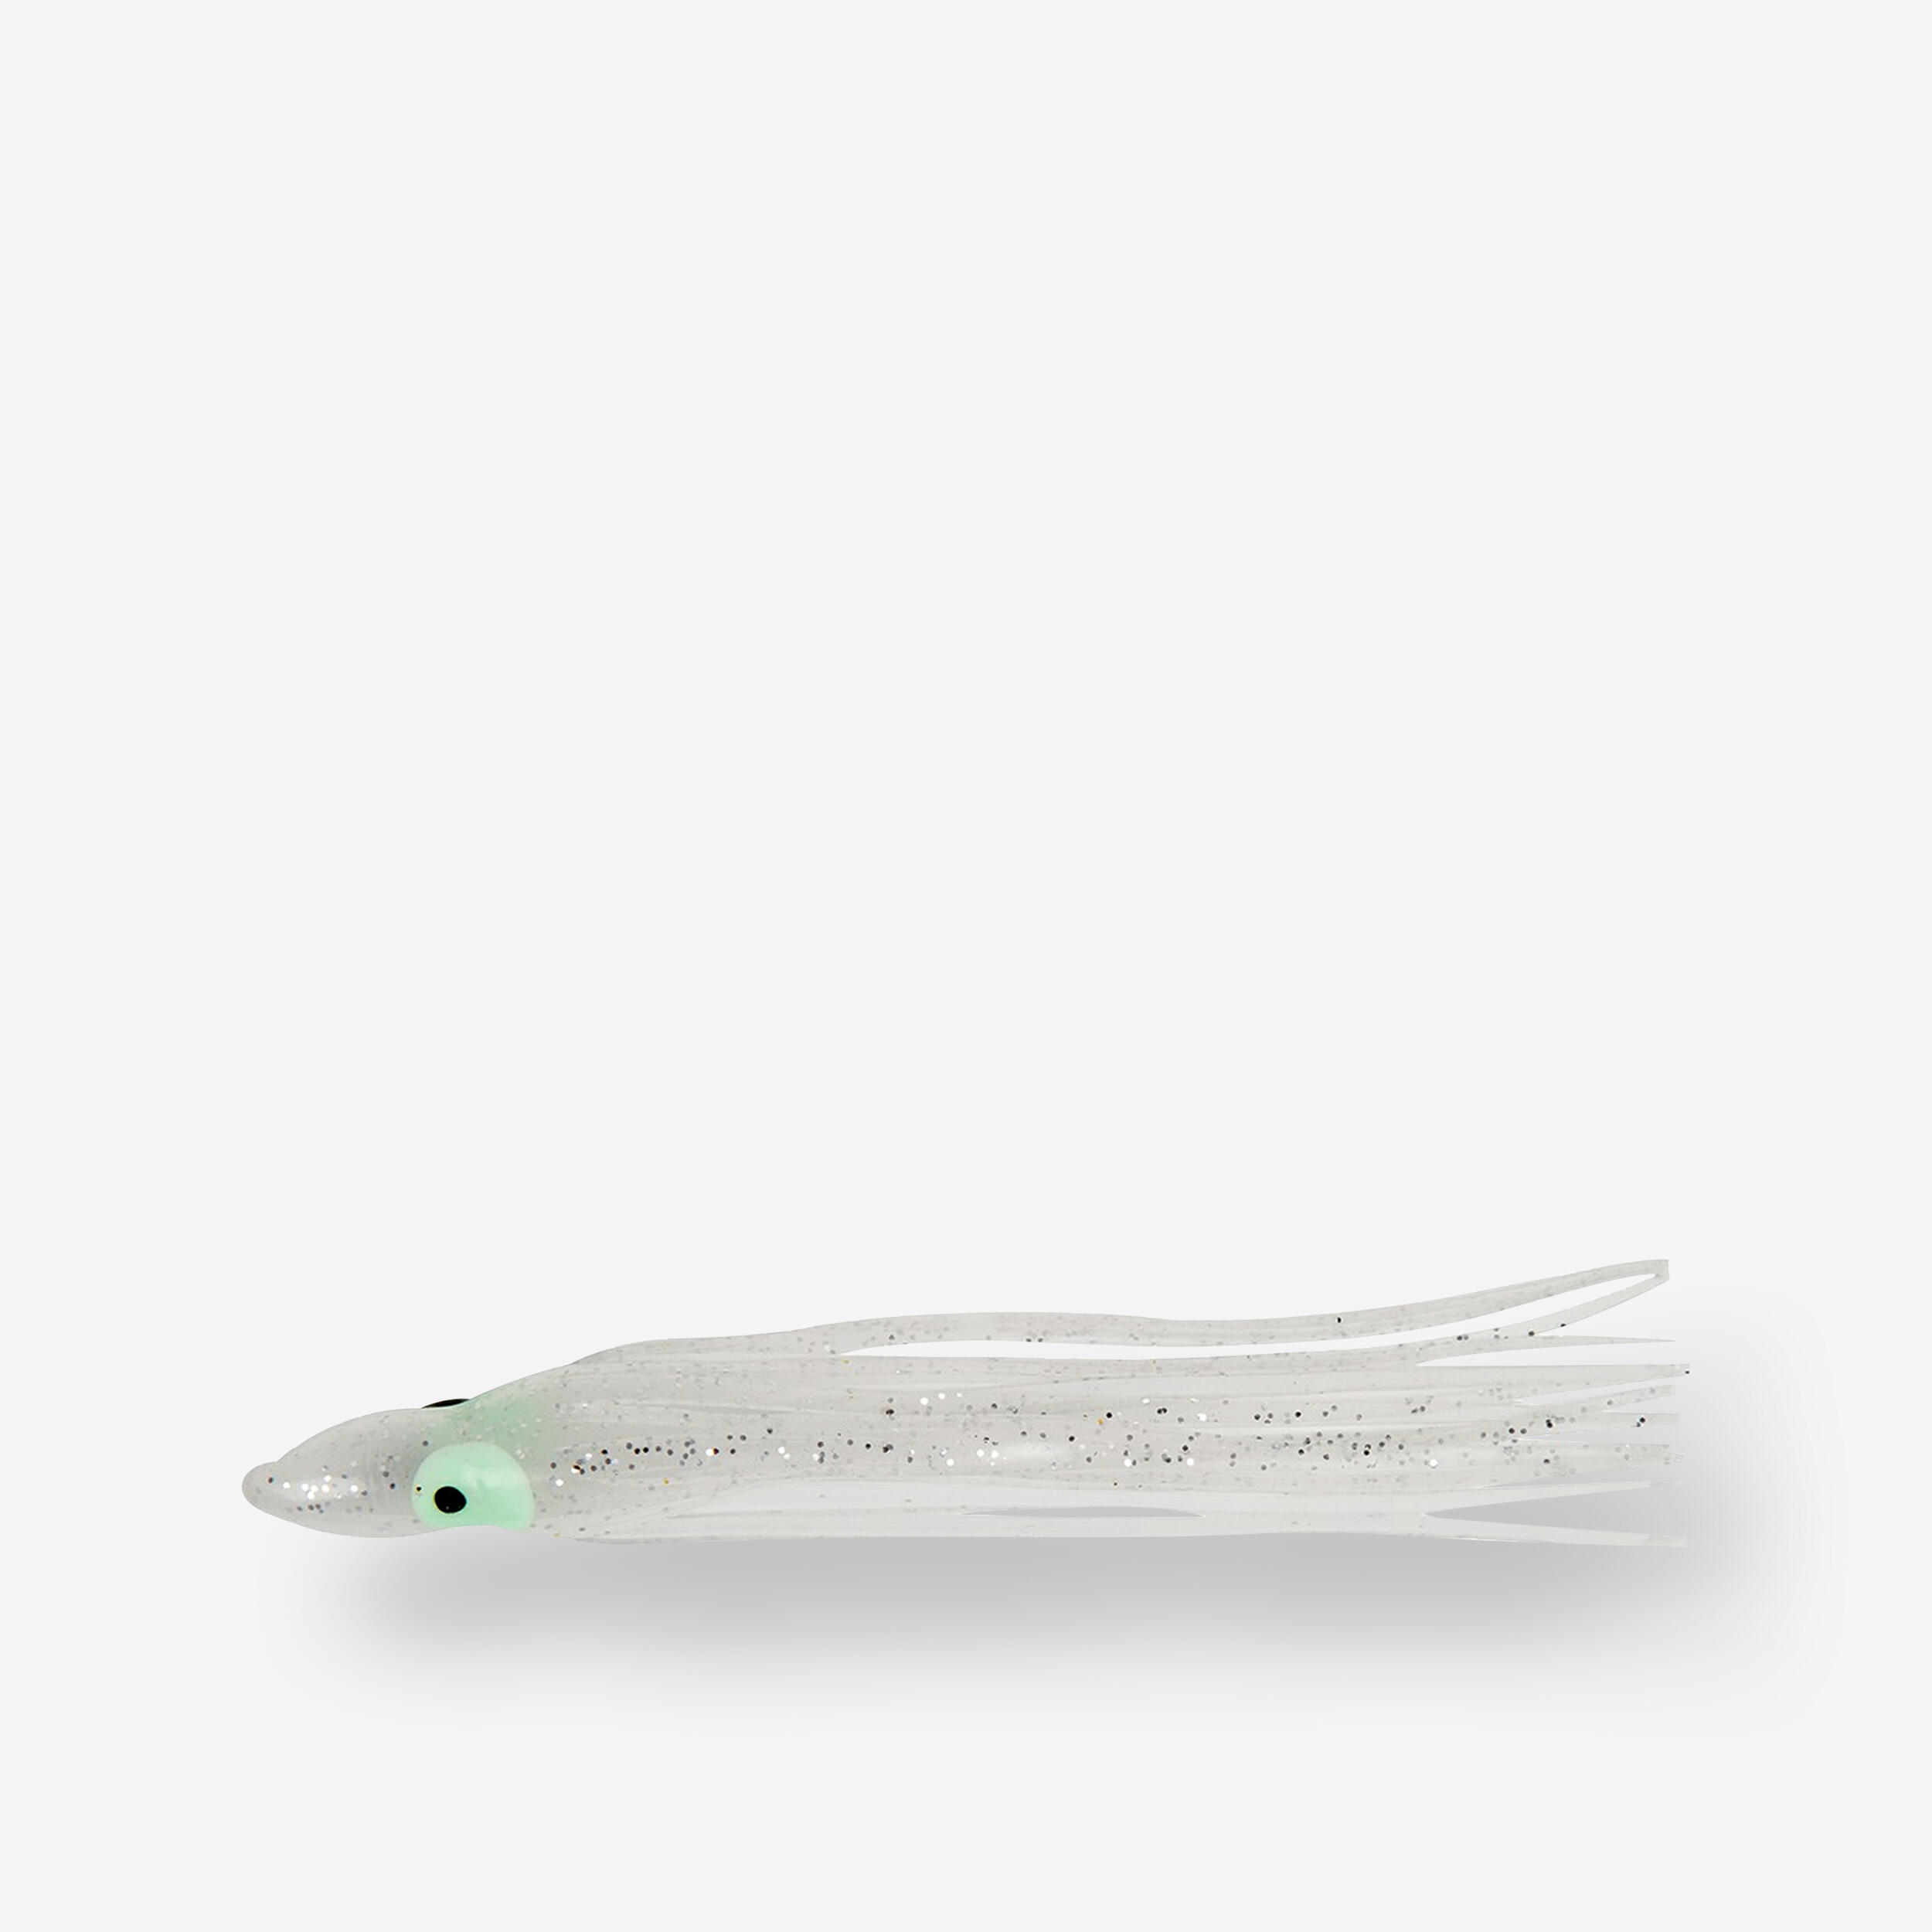 Octopus 6cm sparkly white x5 sea fishing lure 1/2